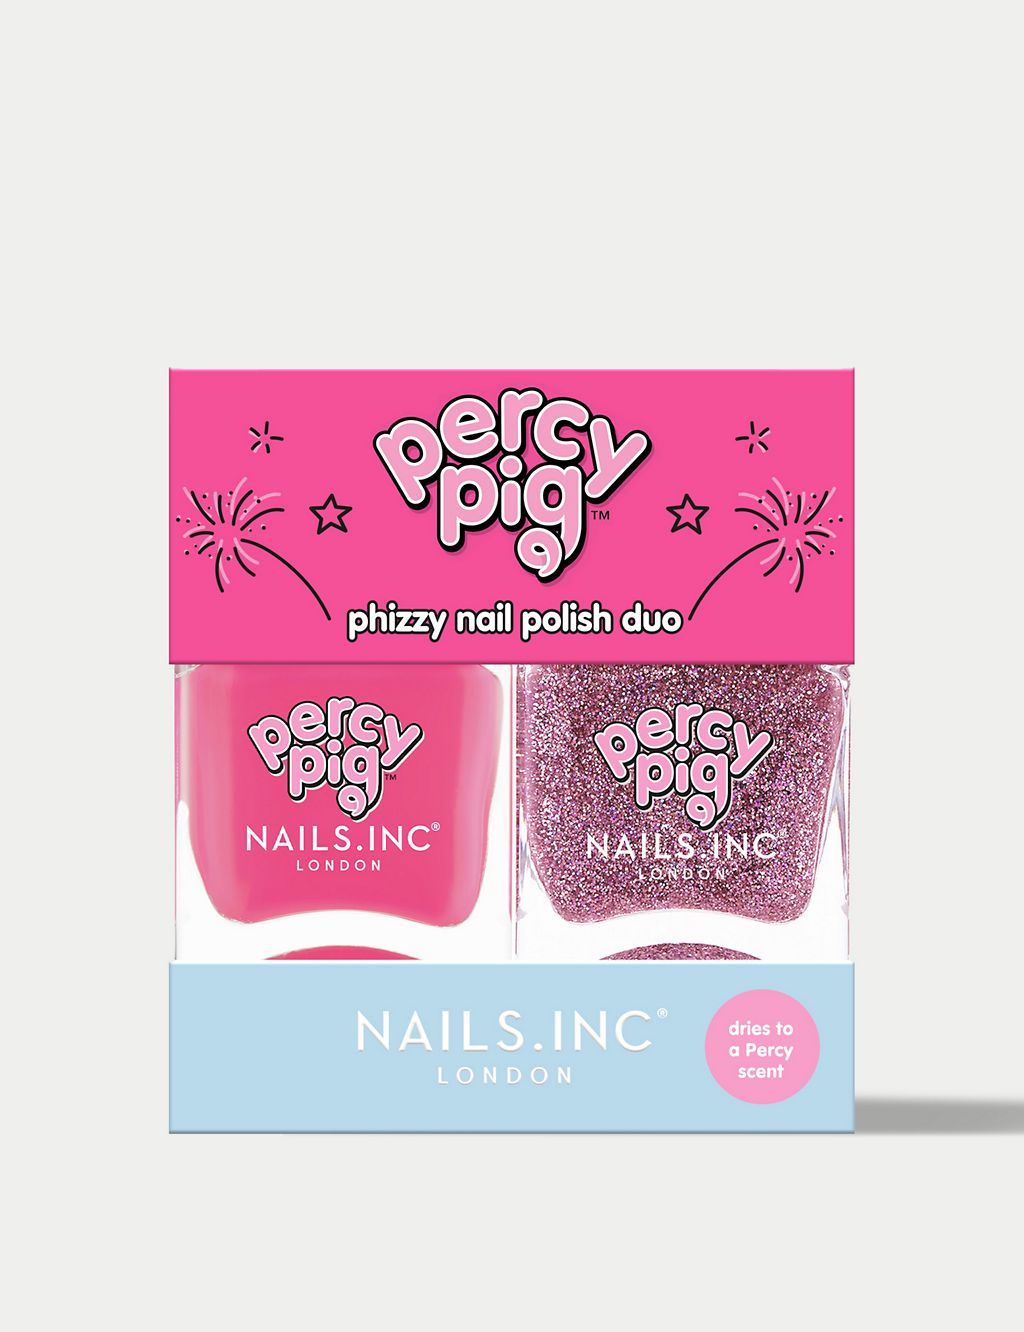 Nails.INC Percy Pig Phizzy Nail Polish Duo 2x14ml 3 of 6